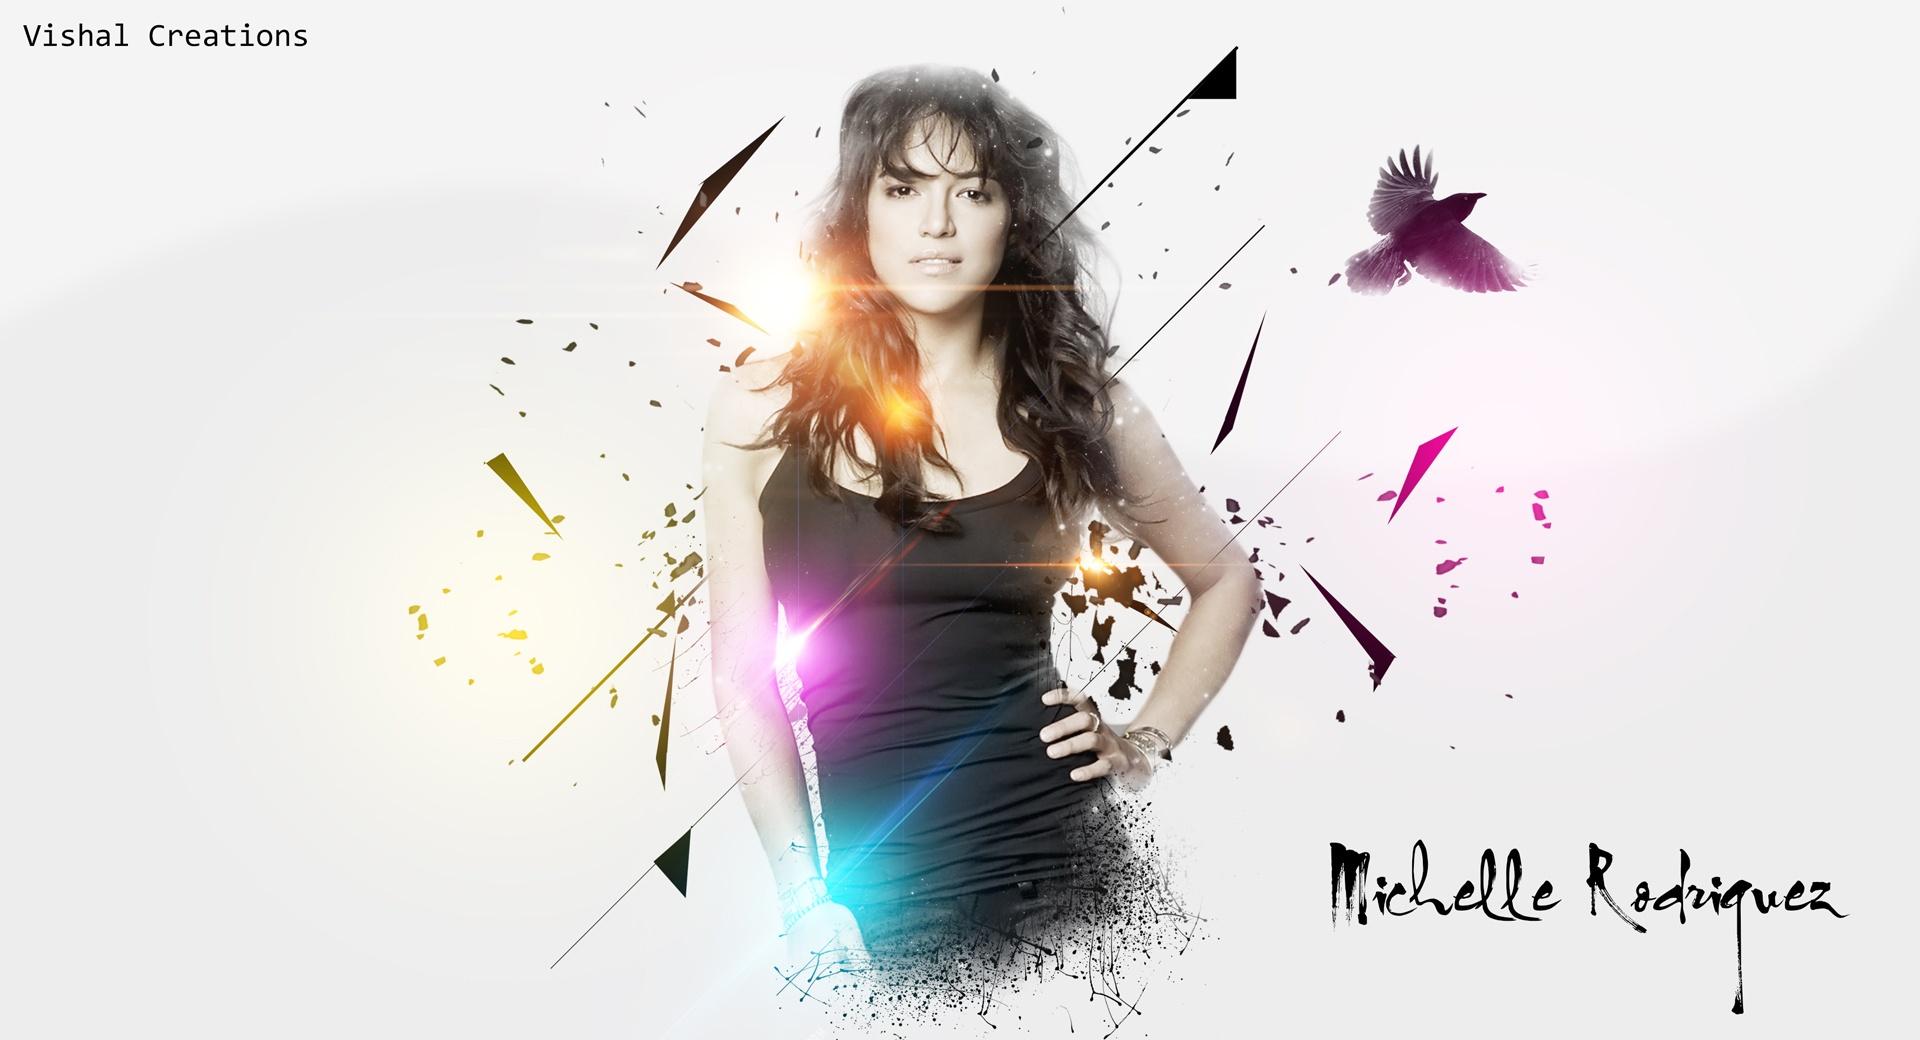 Michelle Rodriguez 2014 wallpapers HD quality